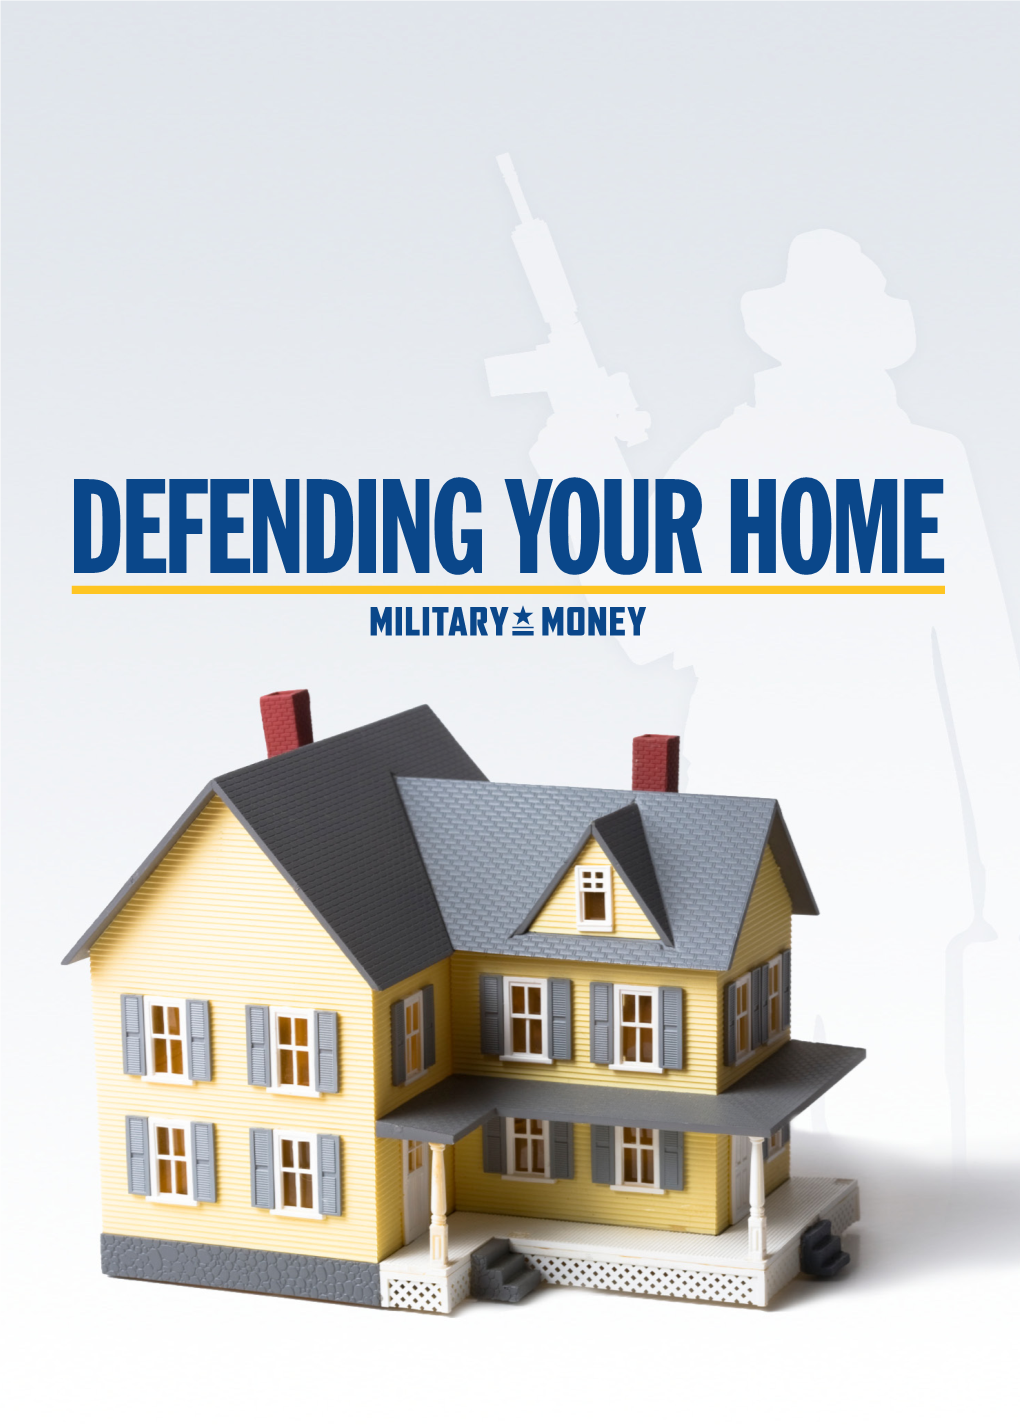 DEFENDING YOUR HOME Defending Your Home Was Made Possible by a Generous Grant from Freddie Mac